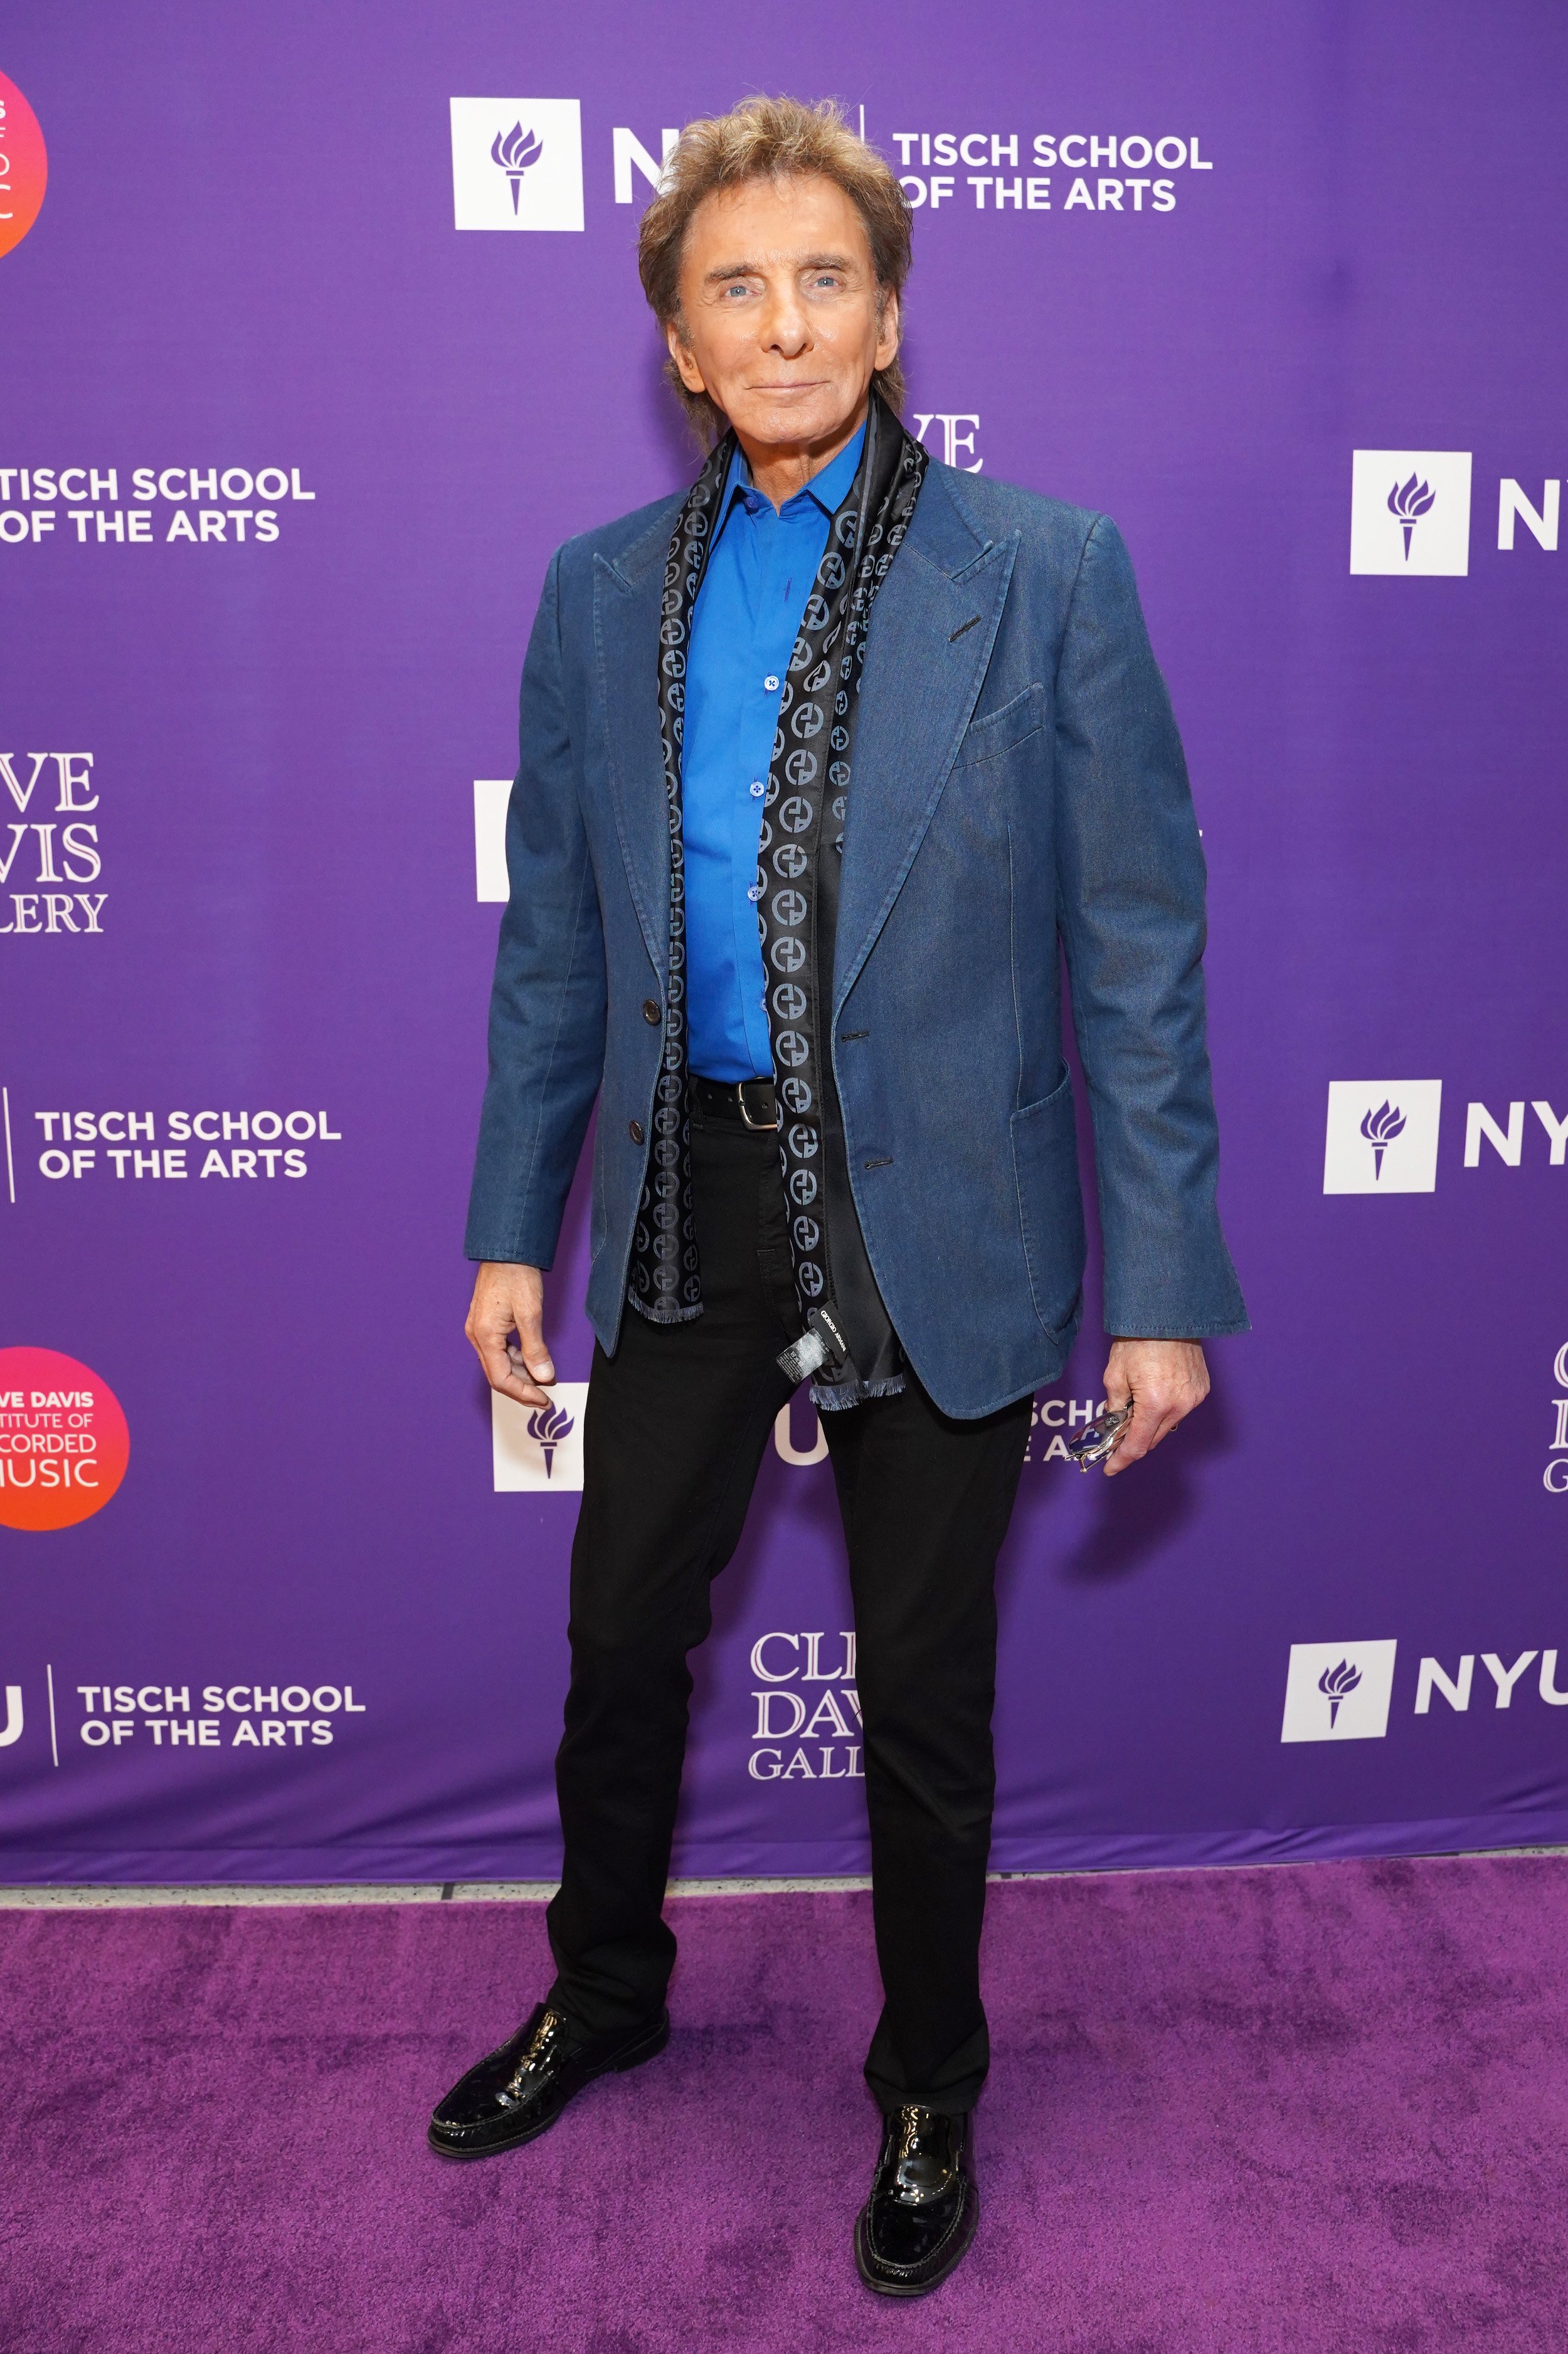 Barry Manilow at the NYU Tisch School of the Arts opening of the Clive Davis Gallery on April 5, 2022 in Brooklyn, New York | Source: Getty Images